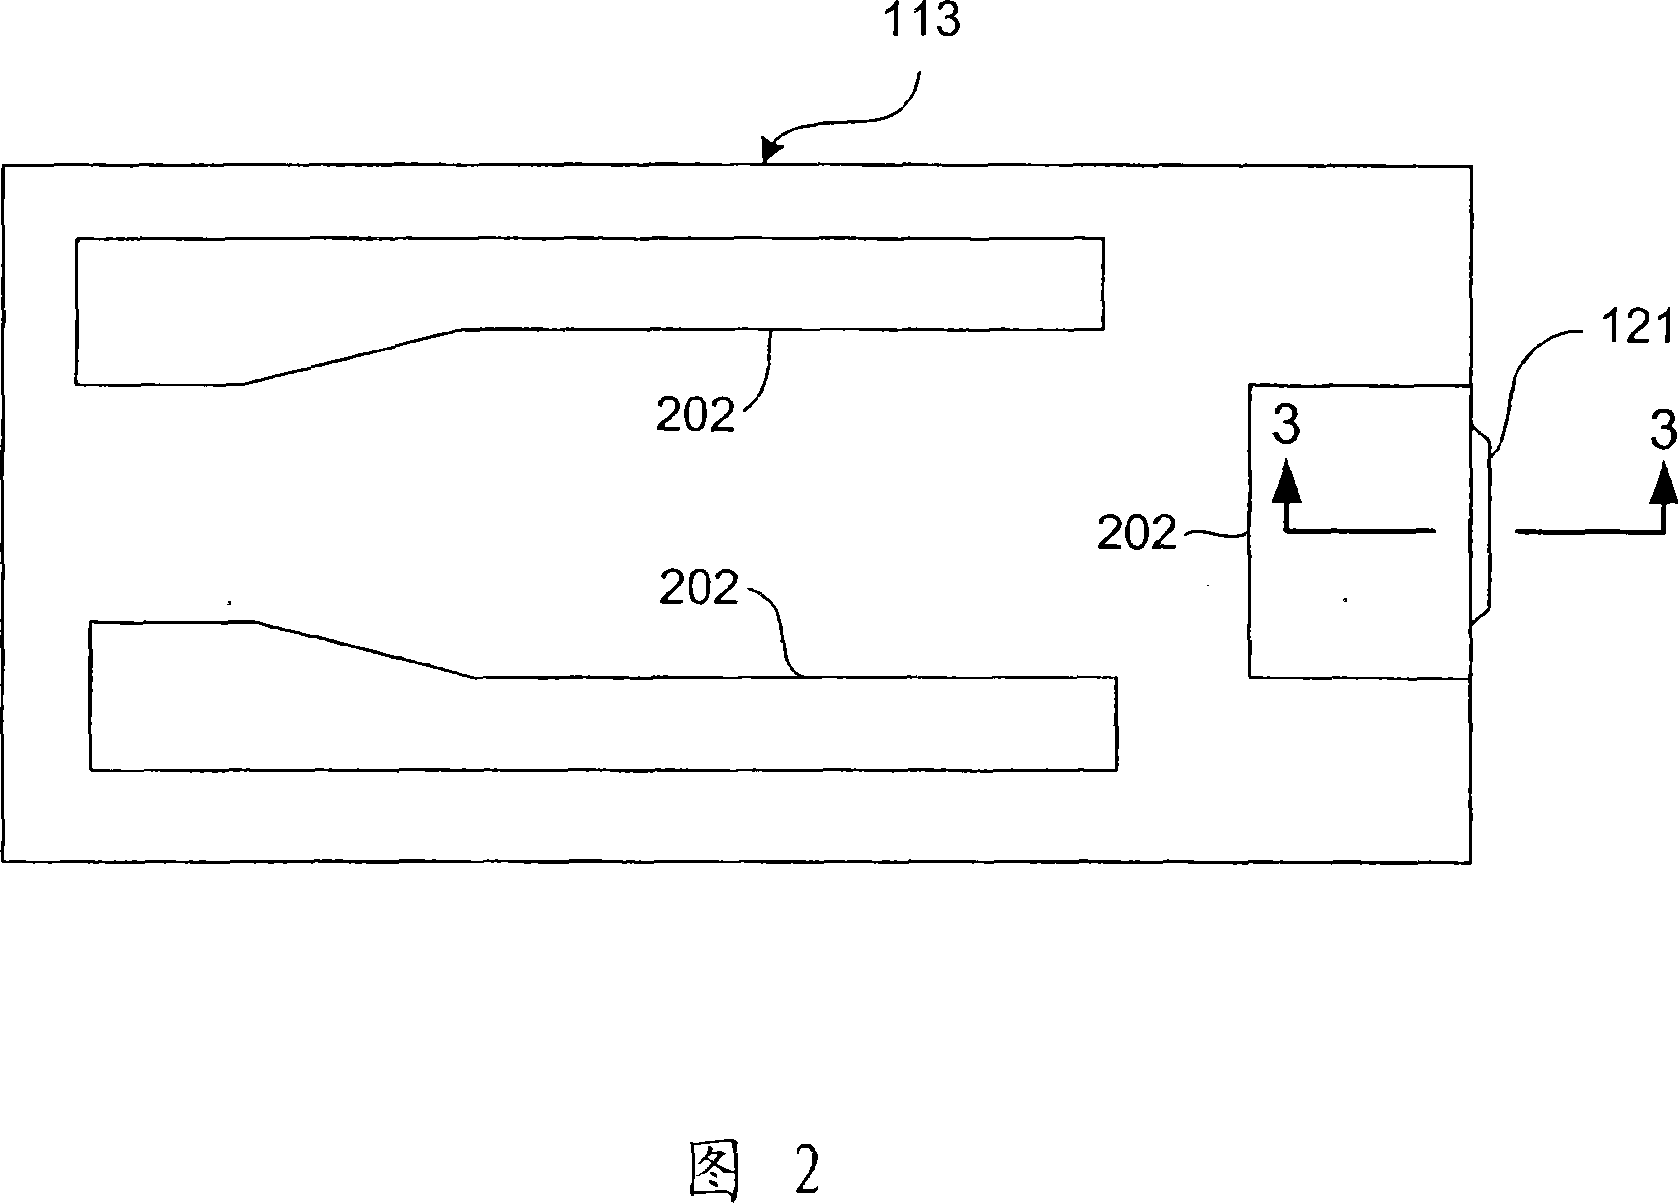 Magnetic write head employing multiple magnetomotive force sources